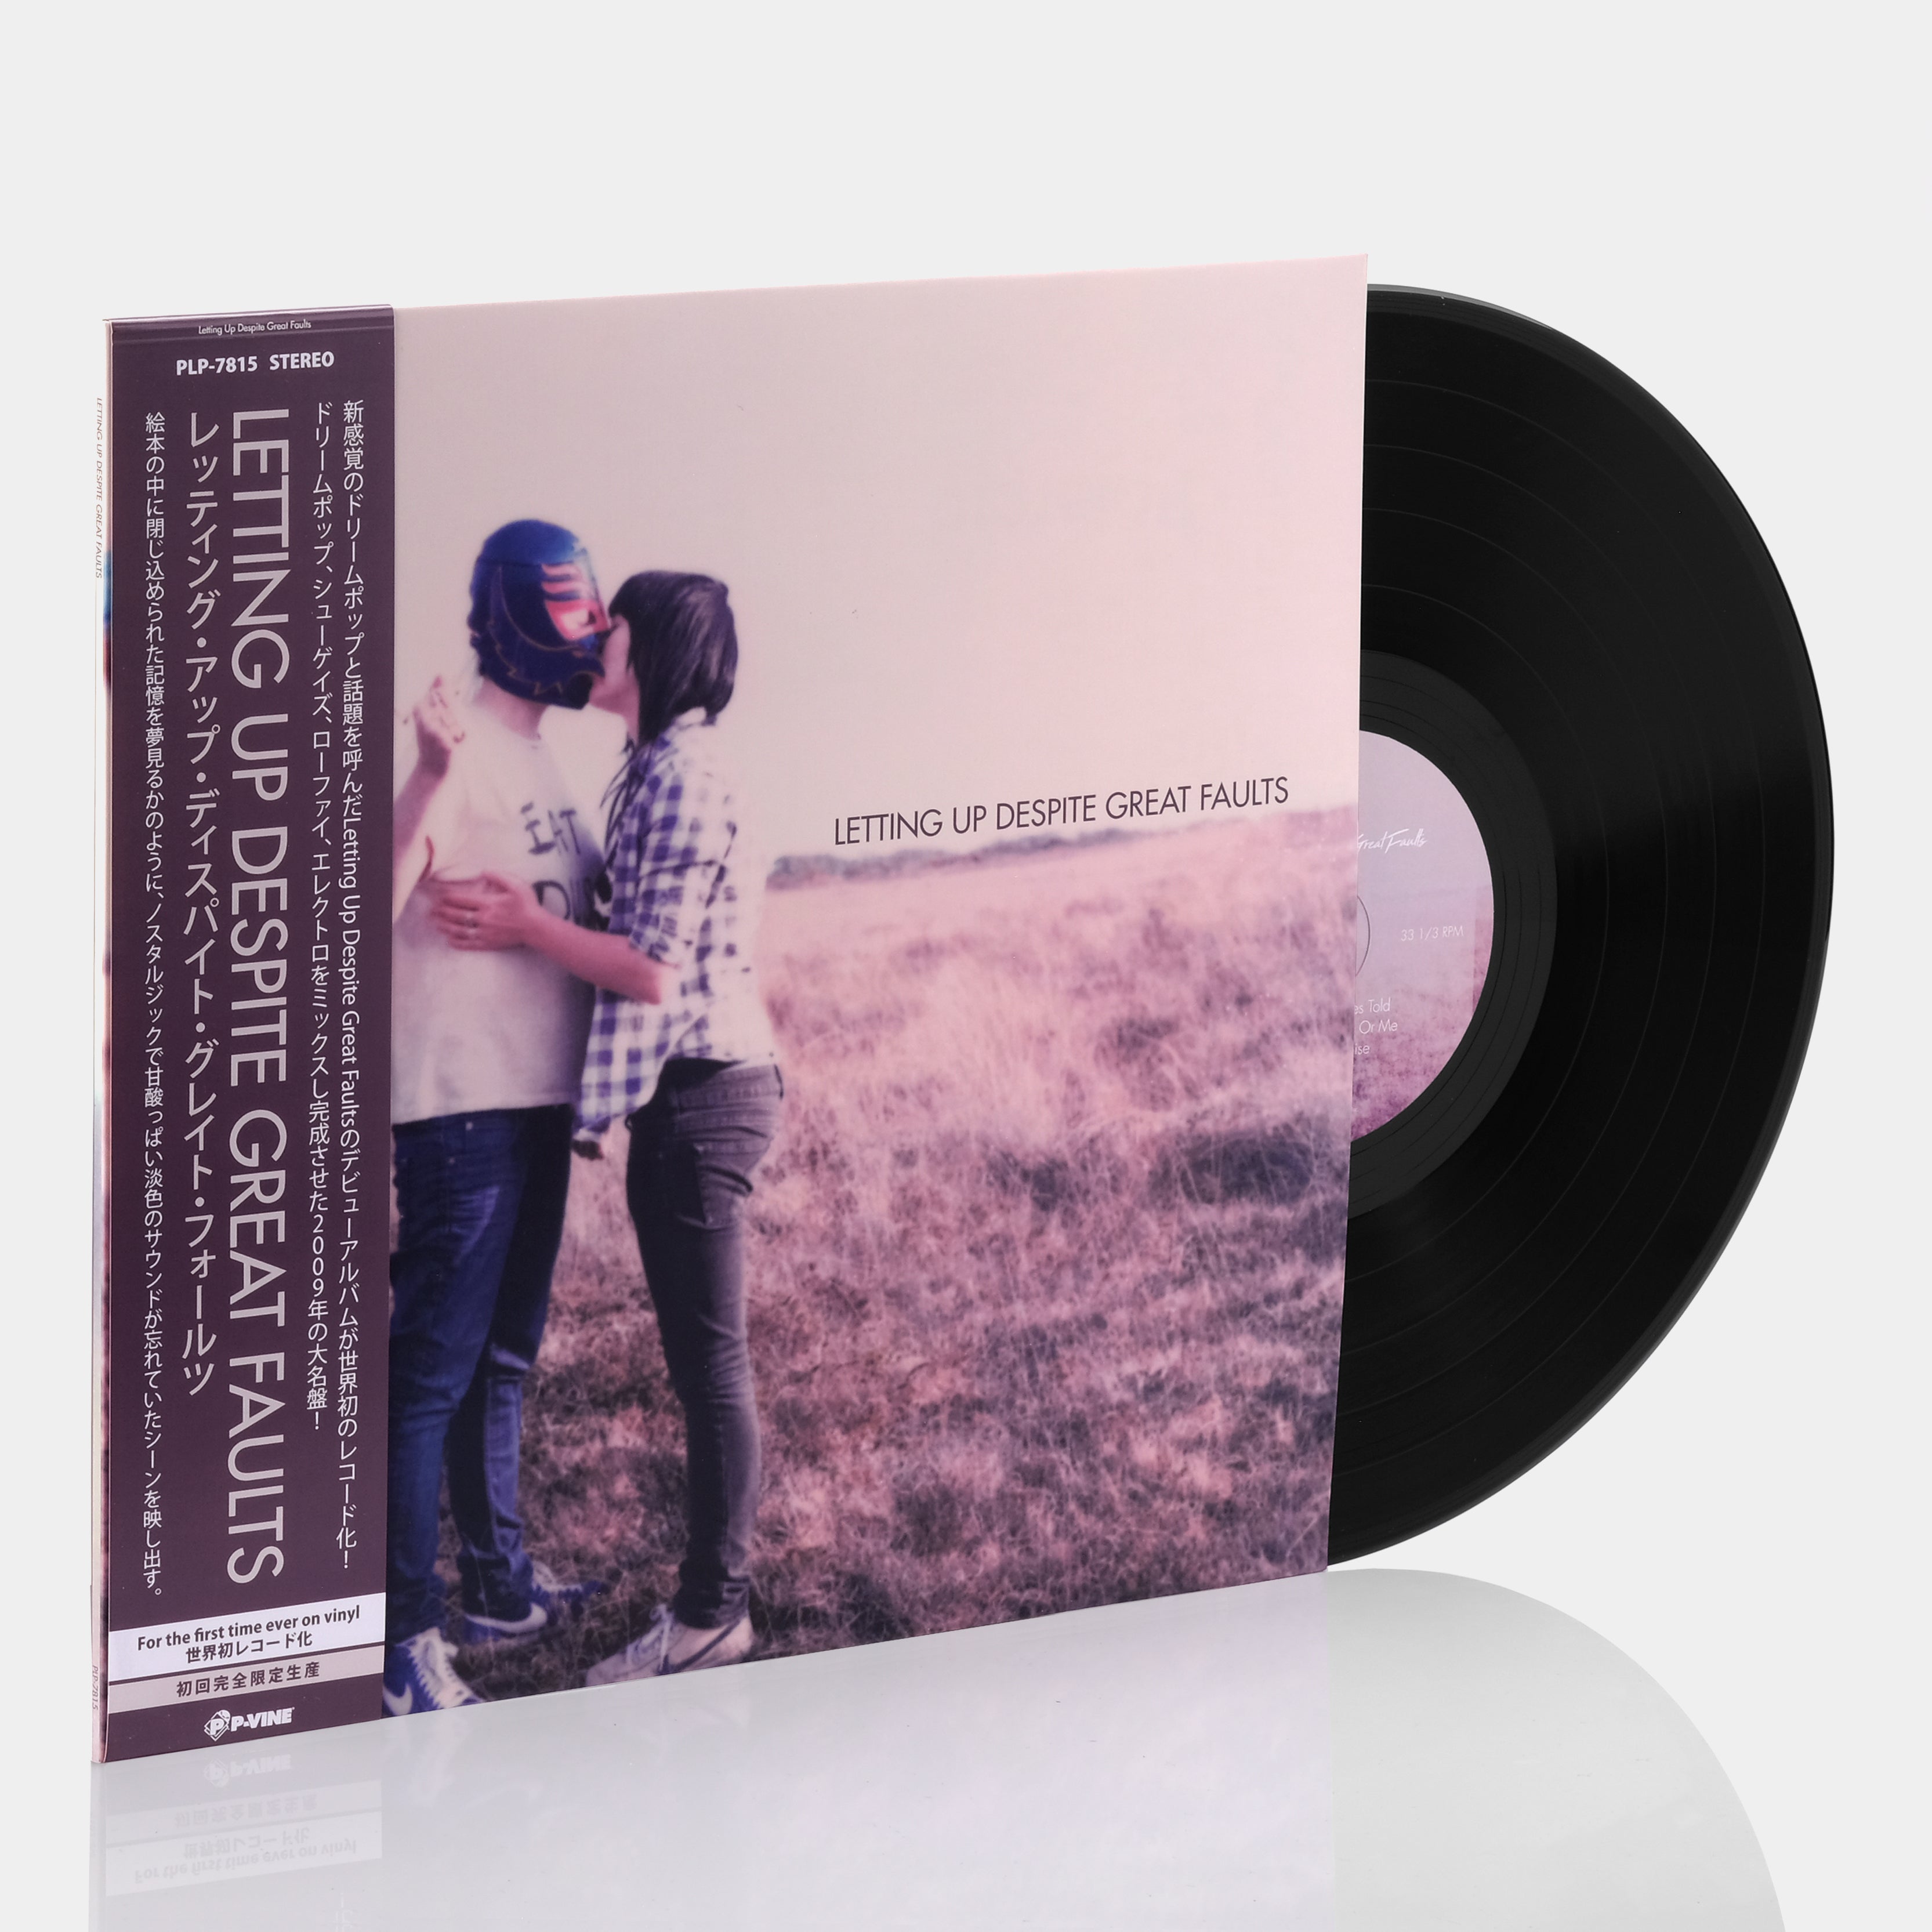 Letting Up Despite Great Faults - Letting Up Despite Great Faults Limited Edition LP Vinyl Record